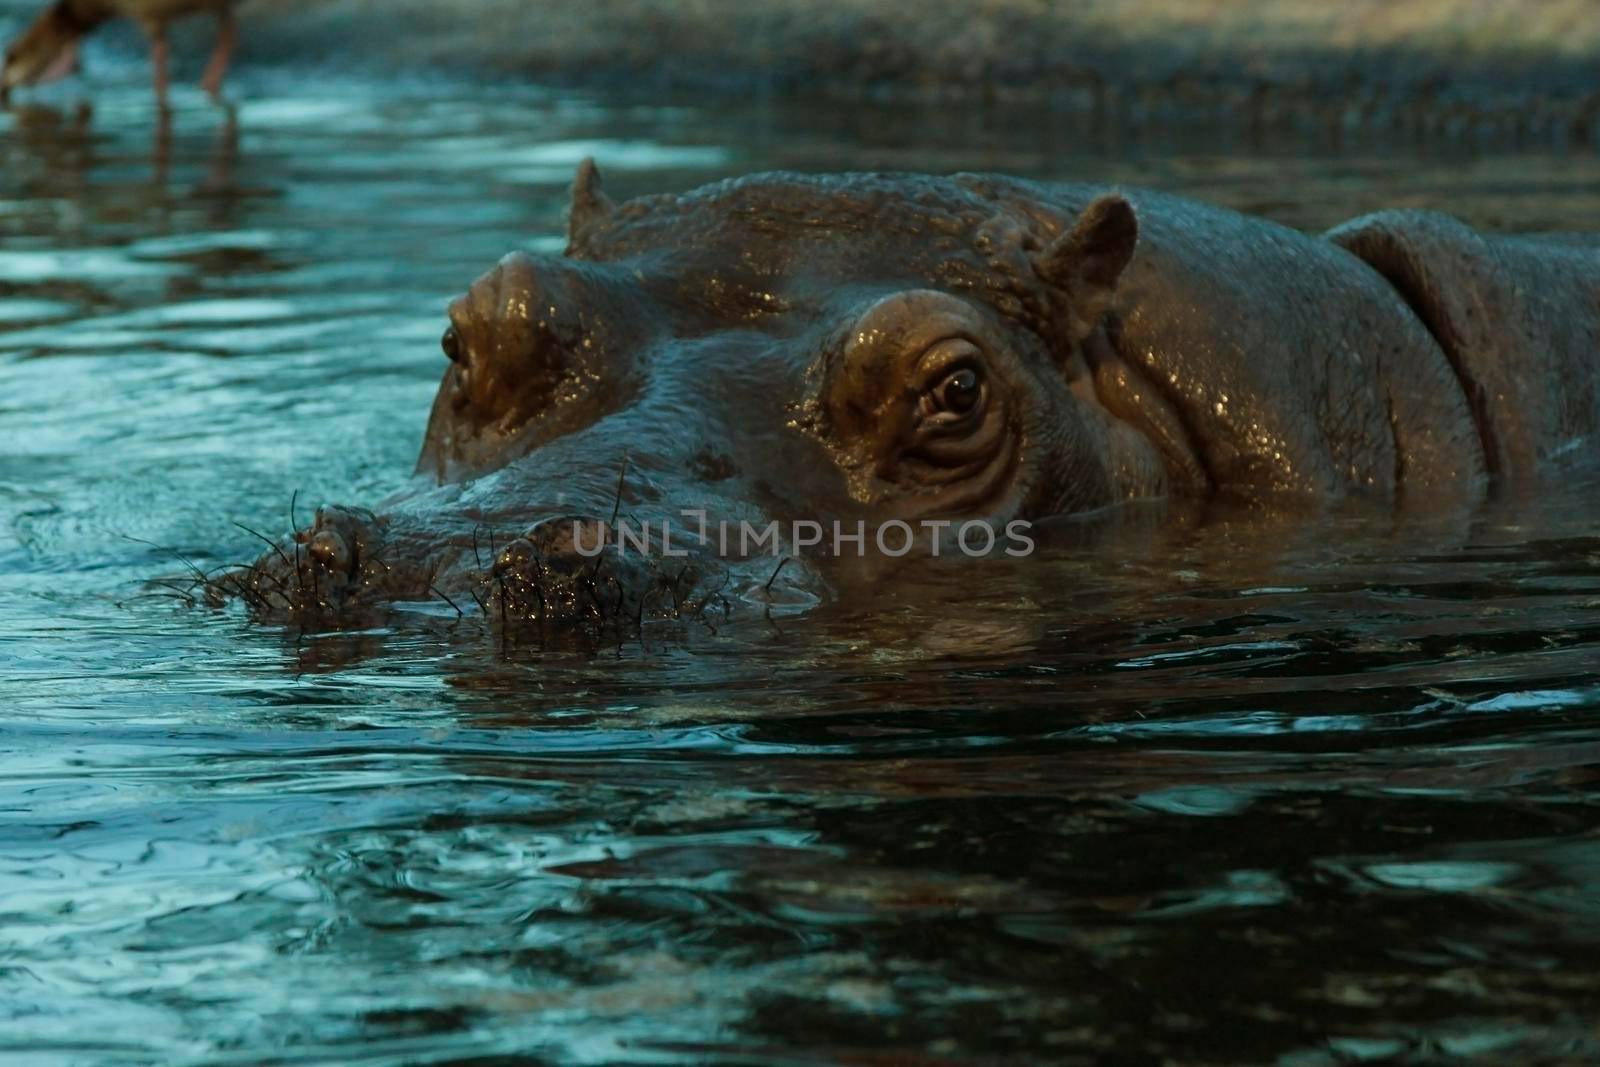 Moustached hippopotamus by Lirch